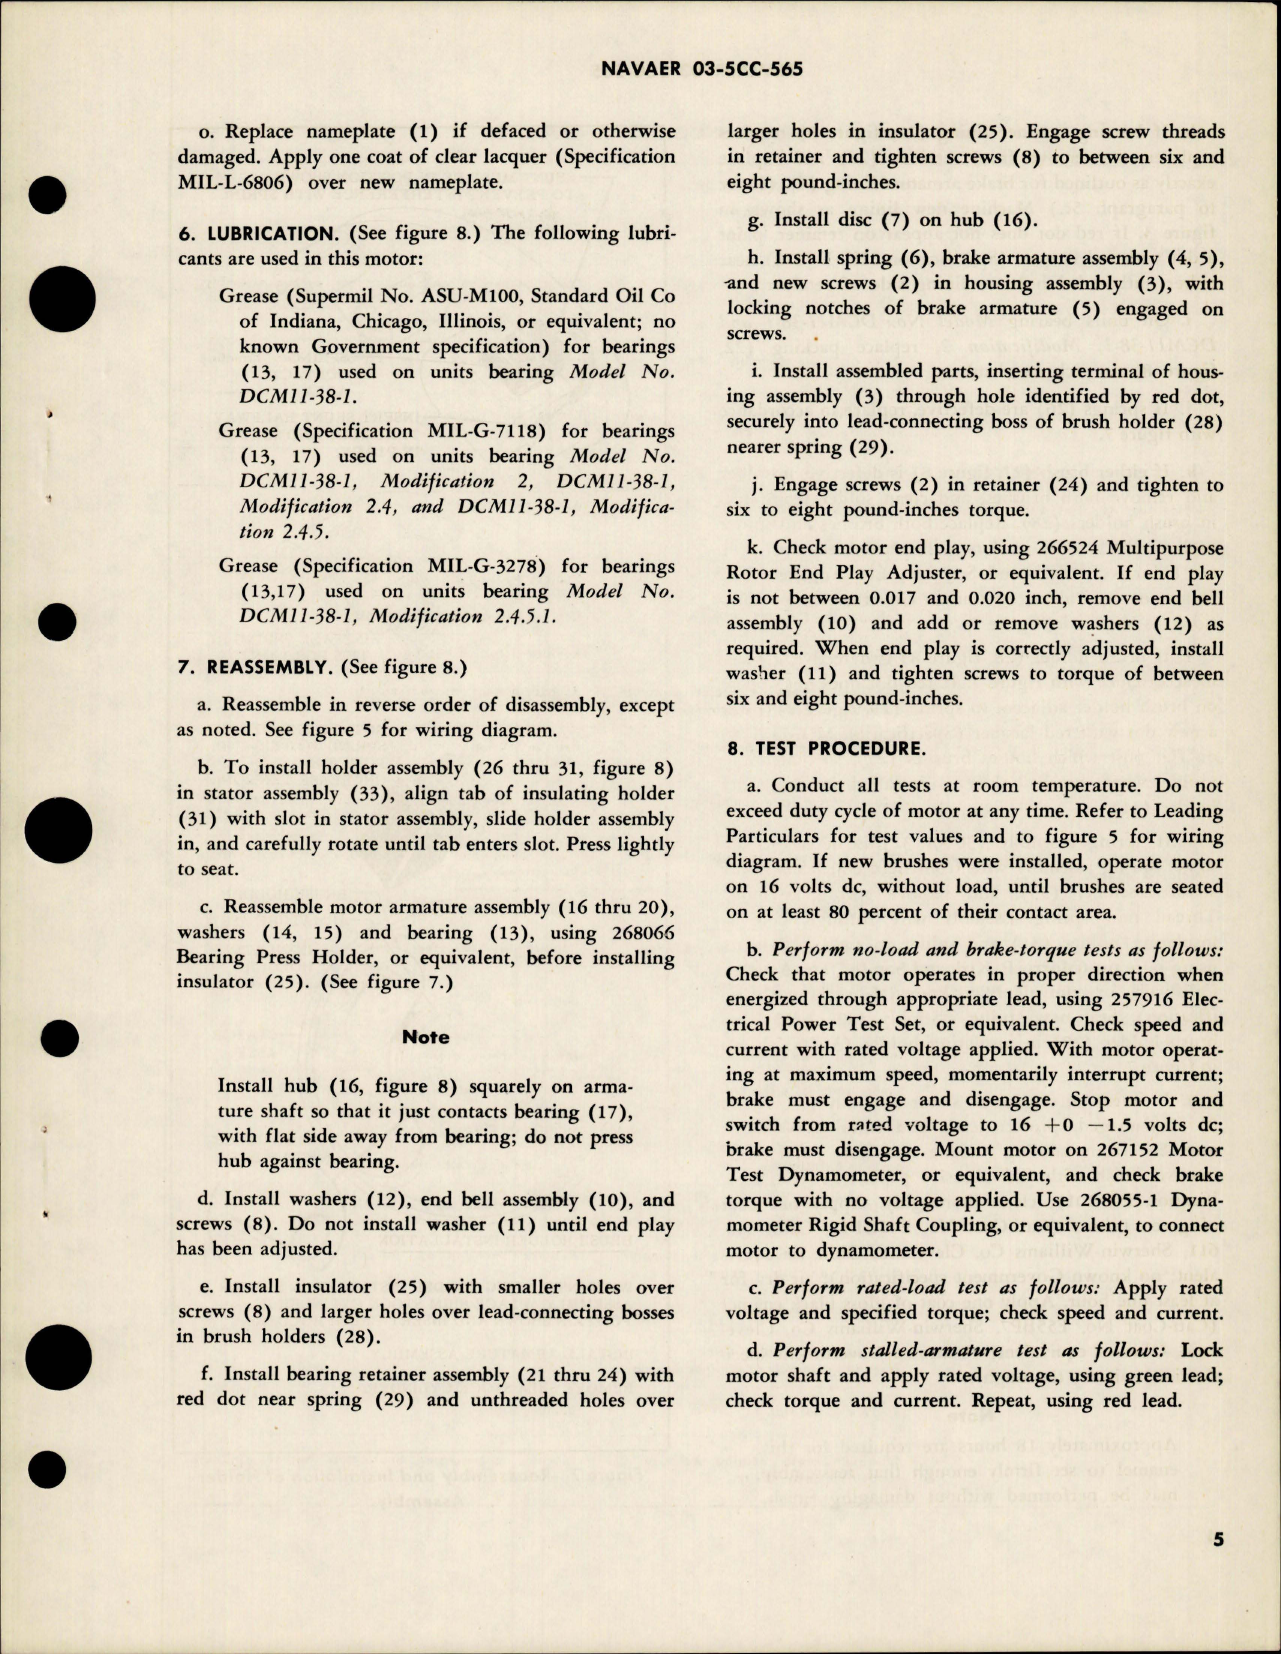 Sample page 5 from AirCorps Library document: Overhaul Instructions with Parts for Aircraft Direct Current Motor - Part 36886 - Model DCM11-38-1